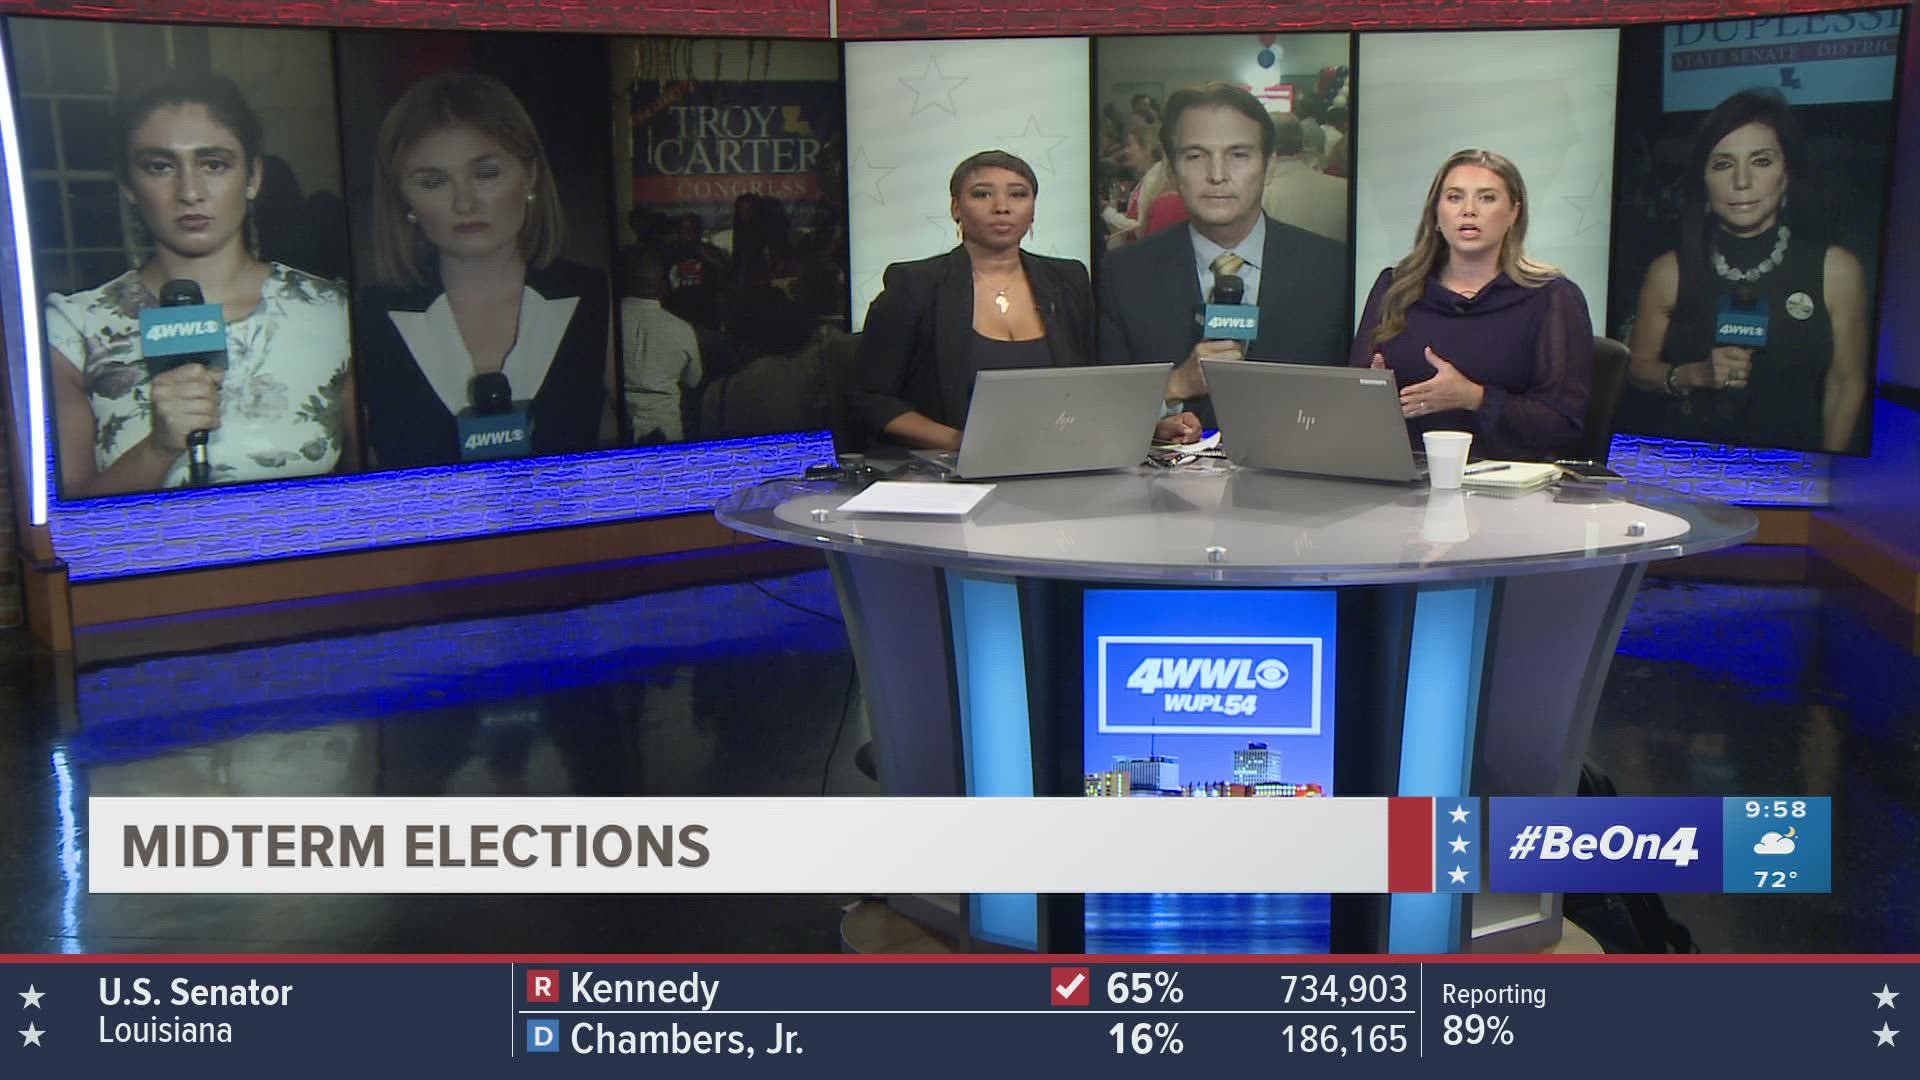 WWL-TV recaps Election results with its 10 pm news on Tuesday night.